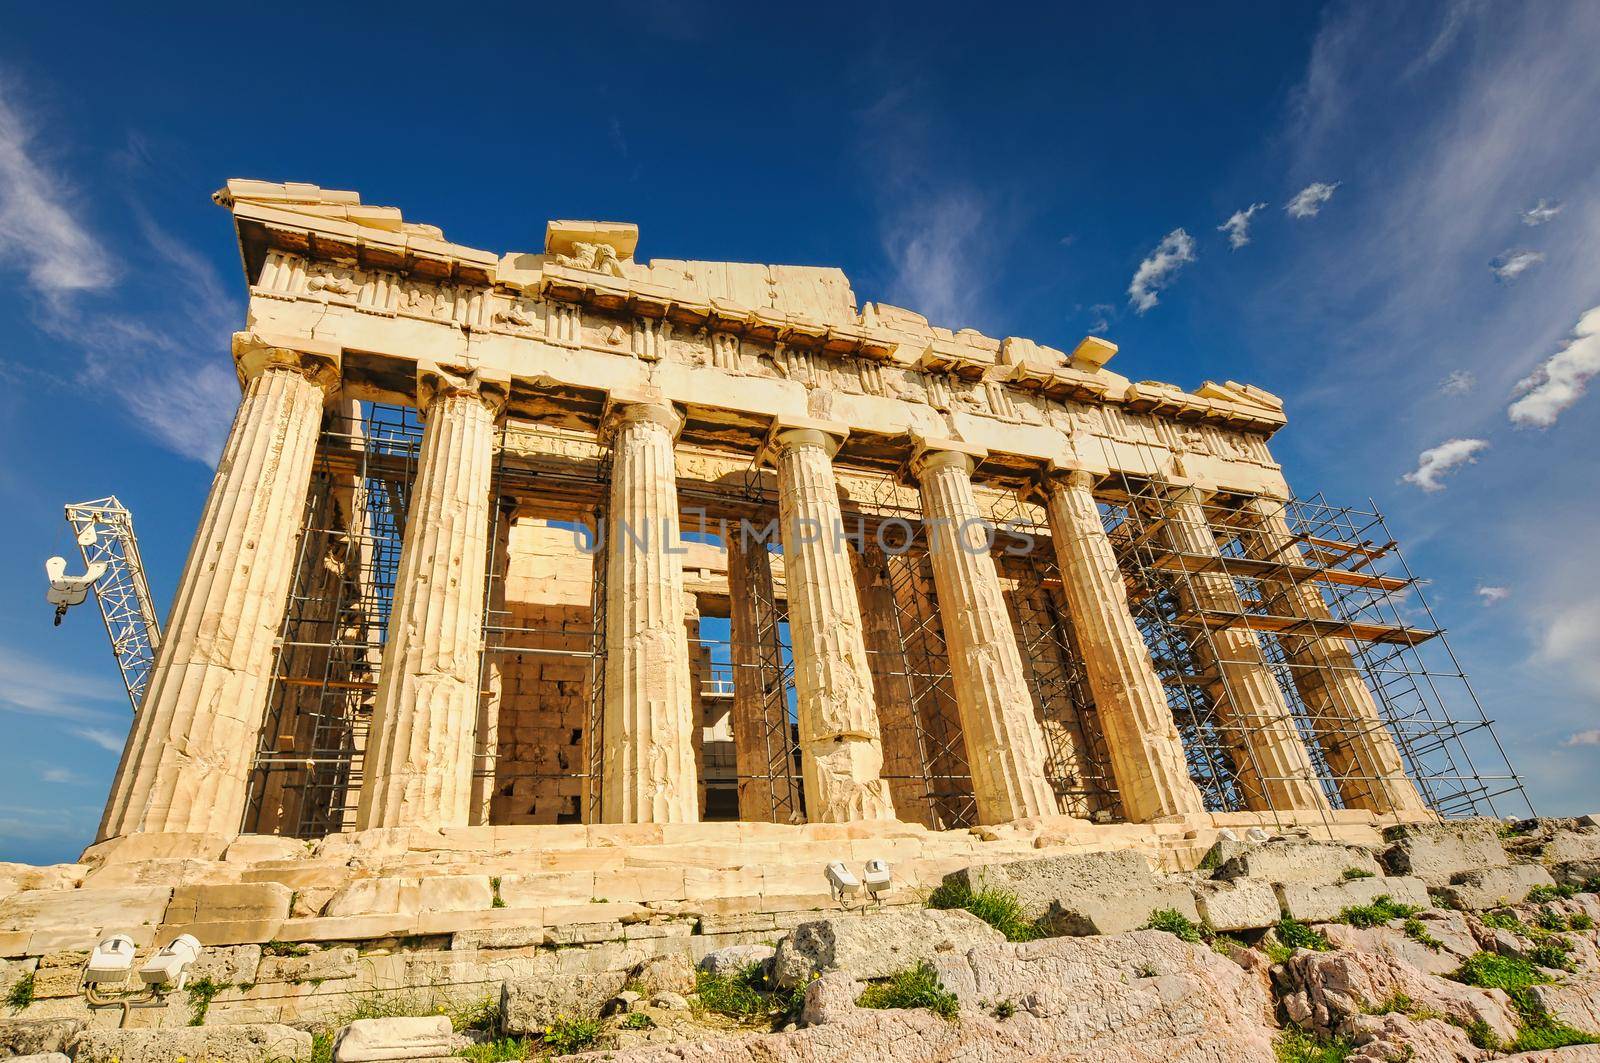 Parthenon temple on a bright day. Acropolis in Athens, Greece..